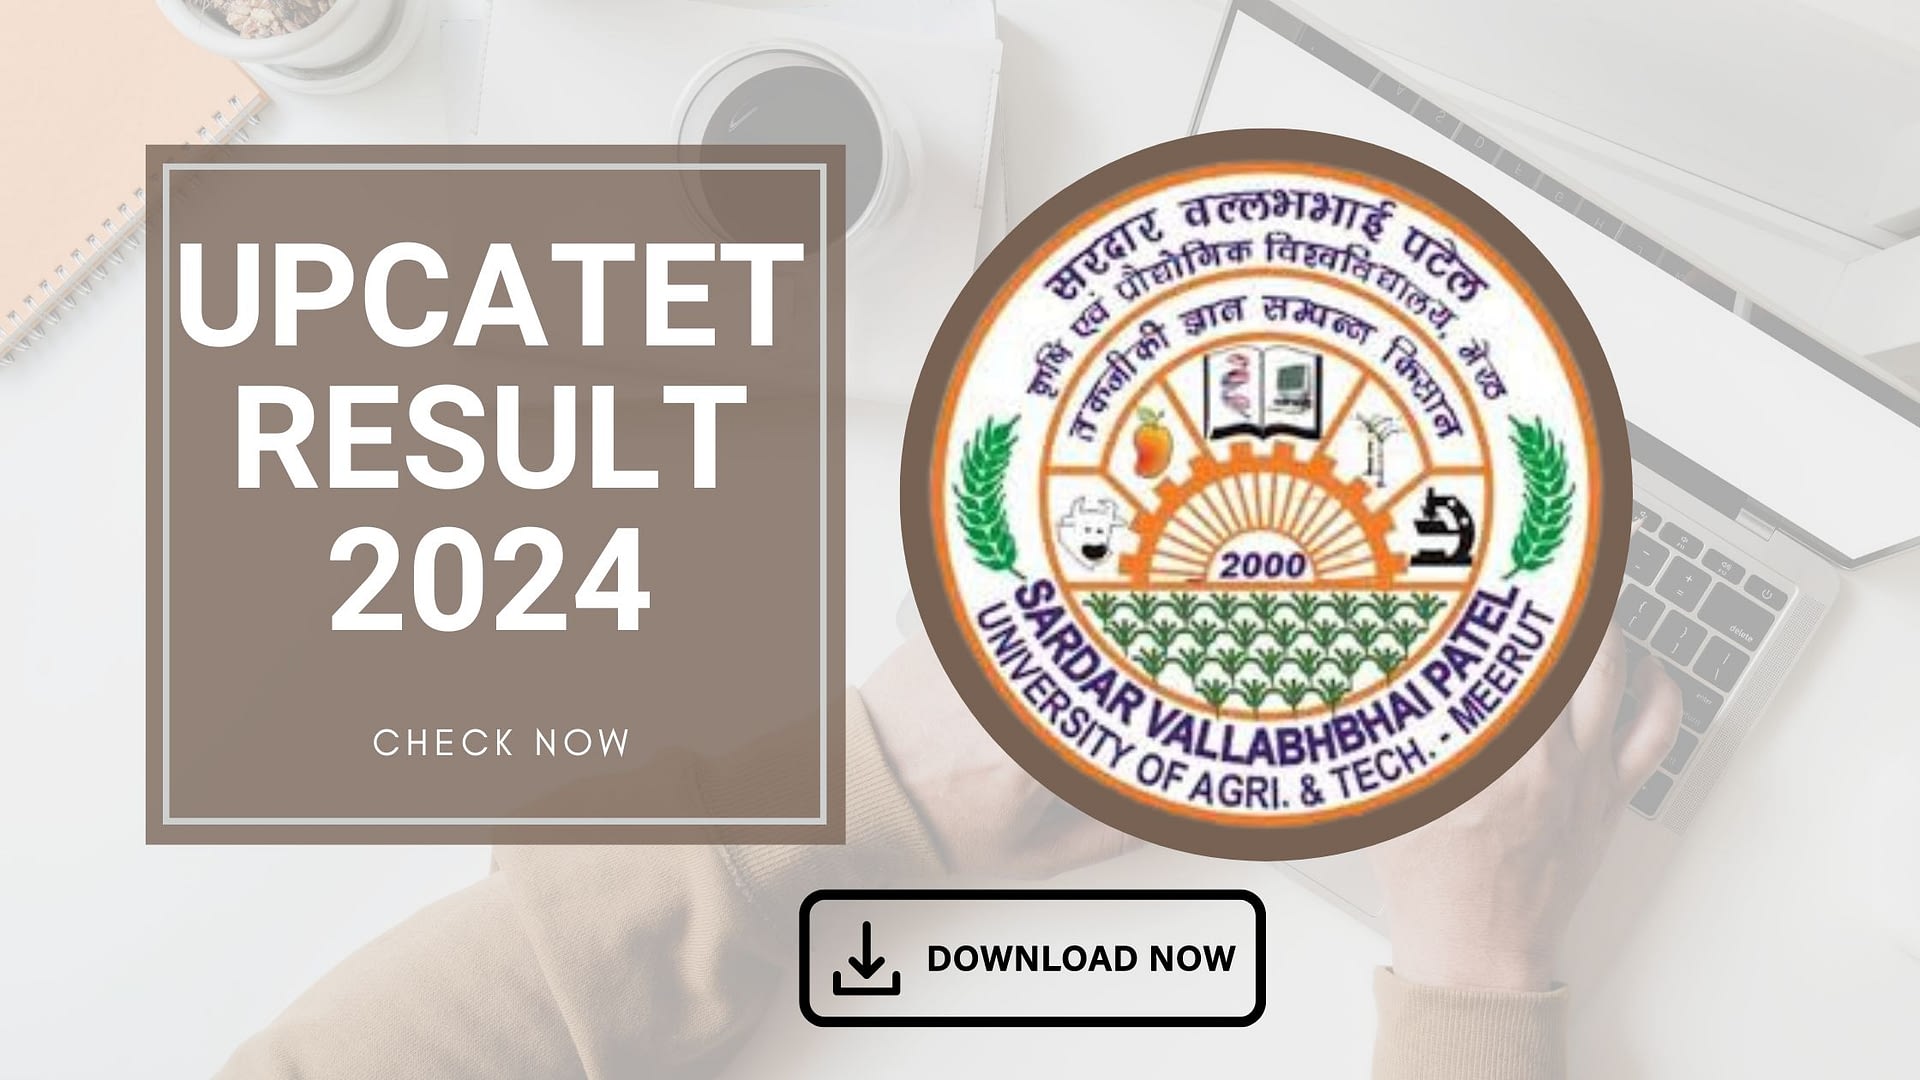 UPCATET Result 2024: Check Your Score and Counselling Process